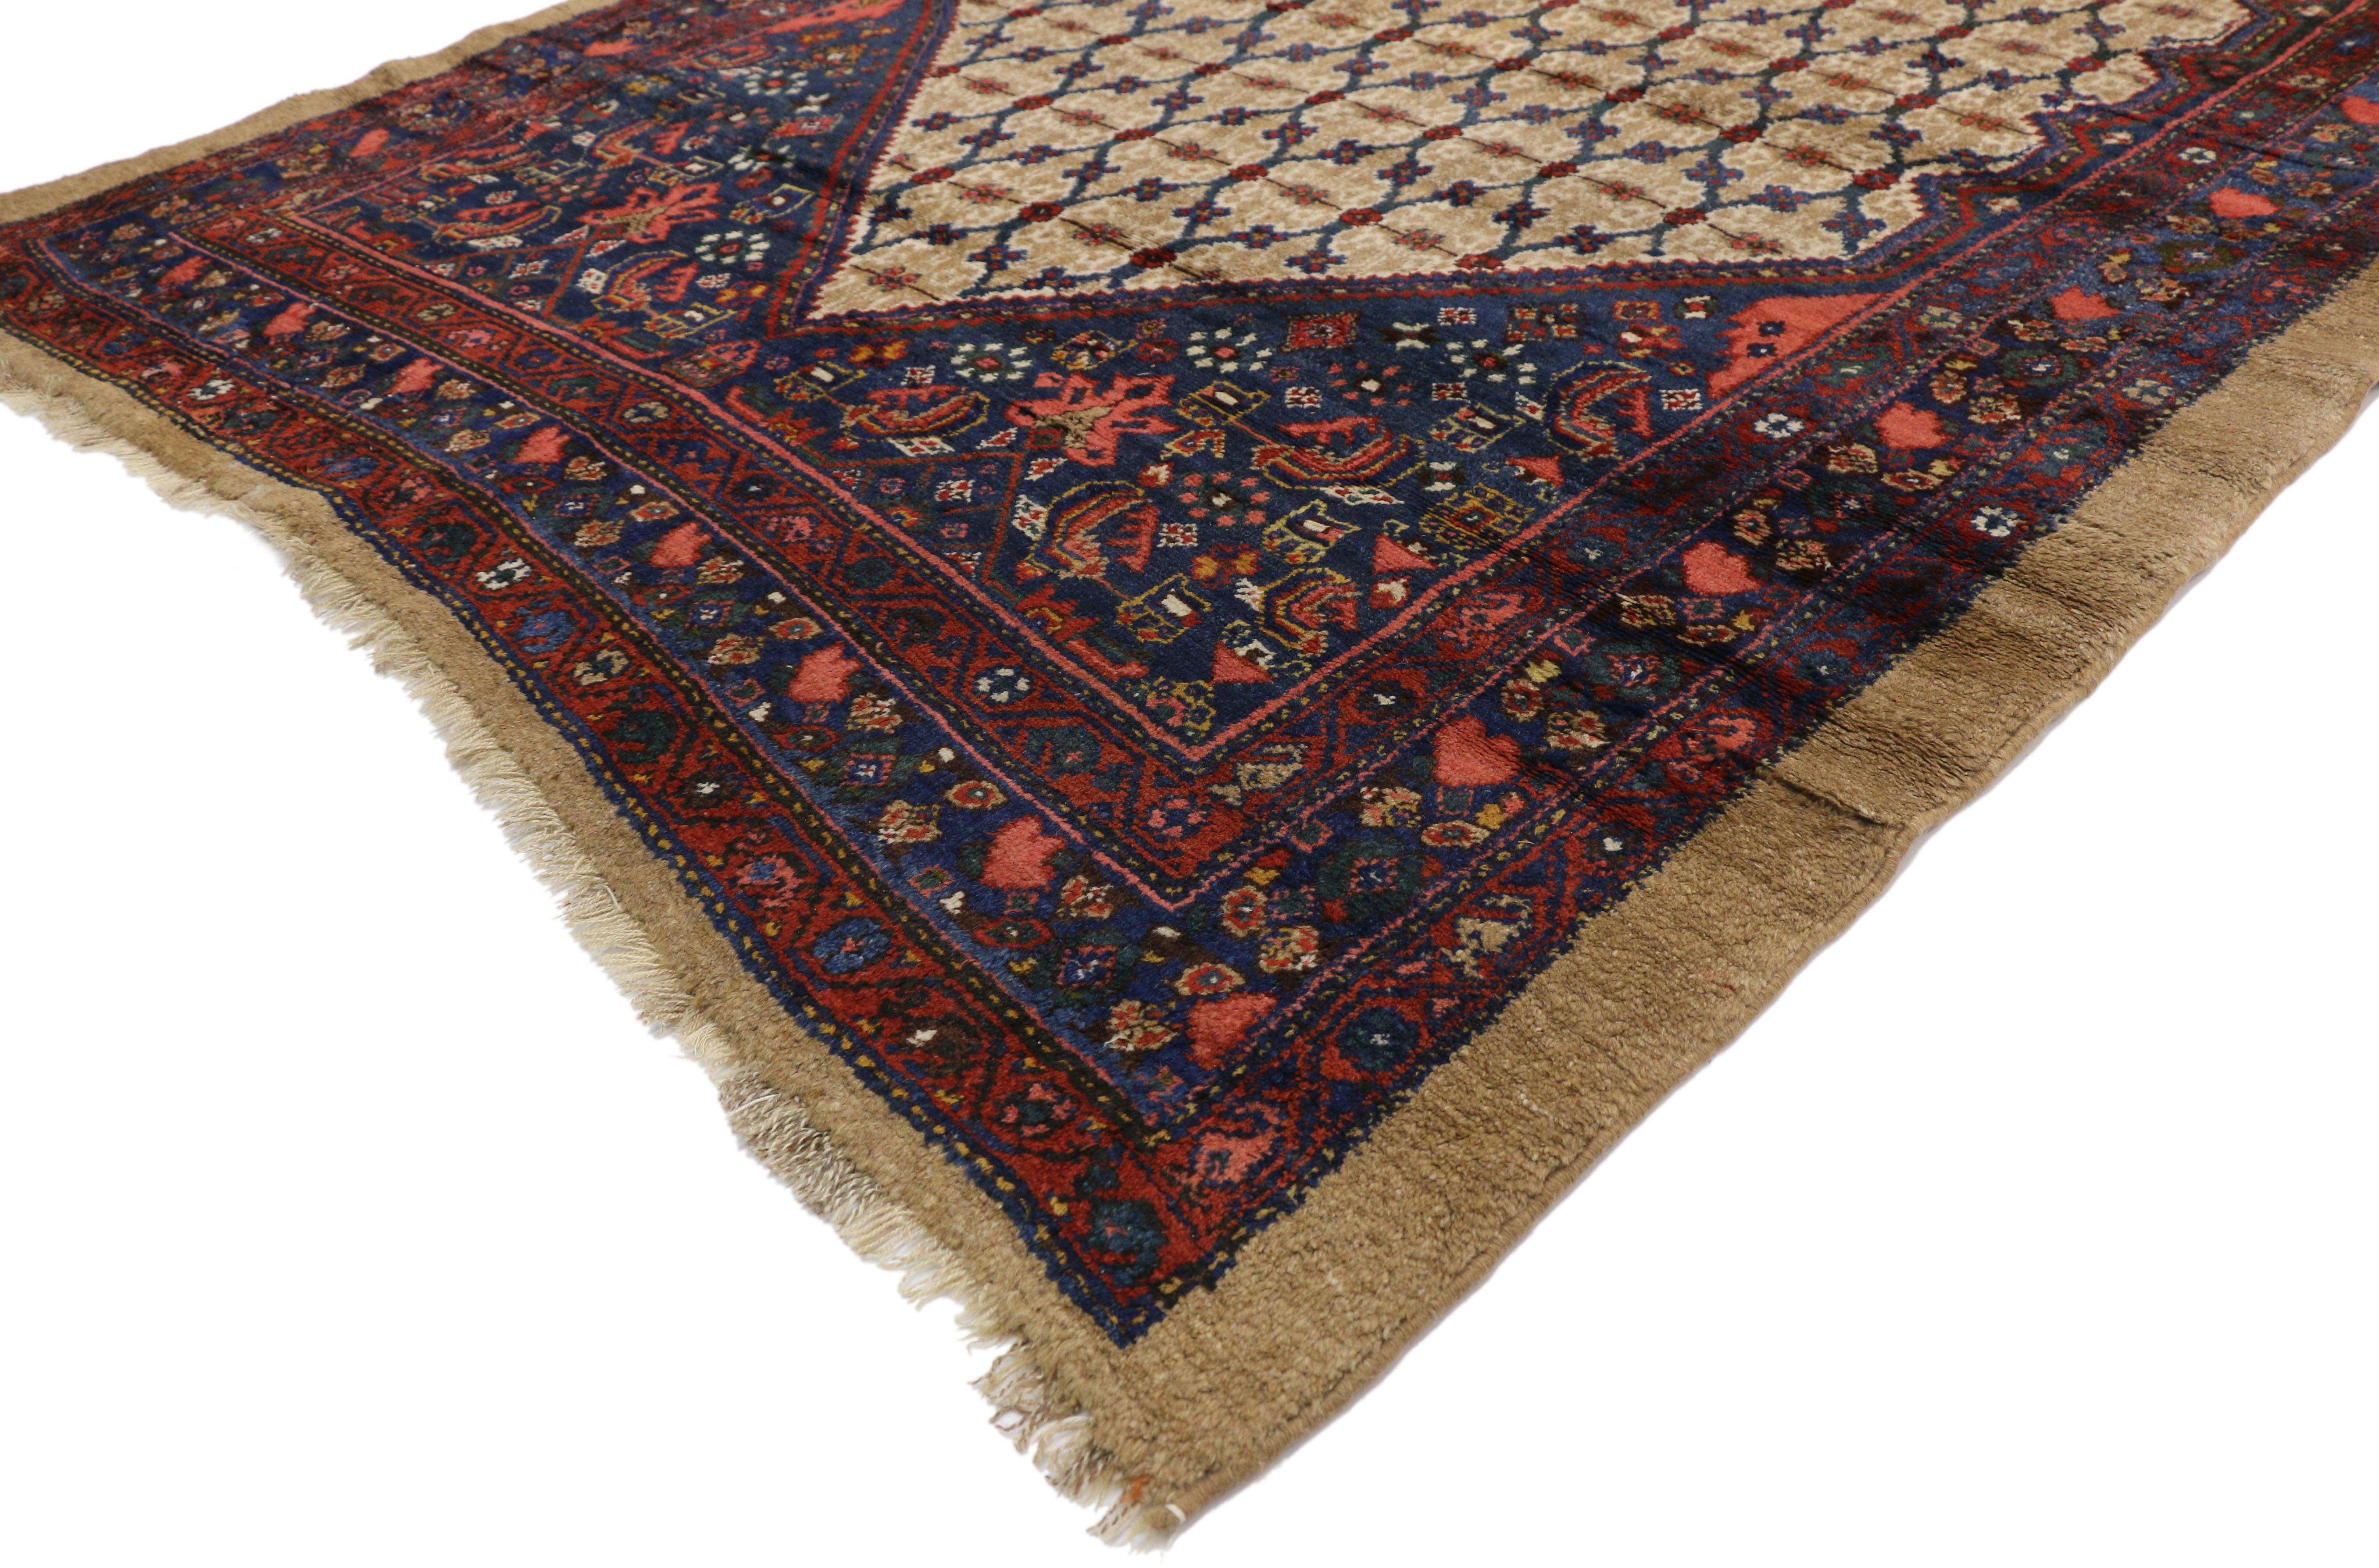 74849 Antique Persian Malayer rug Extra-Long Hallway runner 05'10 x 20'05. Displaying a timeless design and beguiling beauty, this hand-knotted wool antique Persian Malayer rug is a captivating vision of woven beauty. The abrashed beige field is